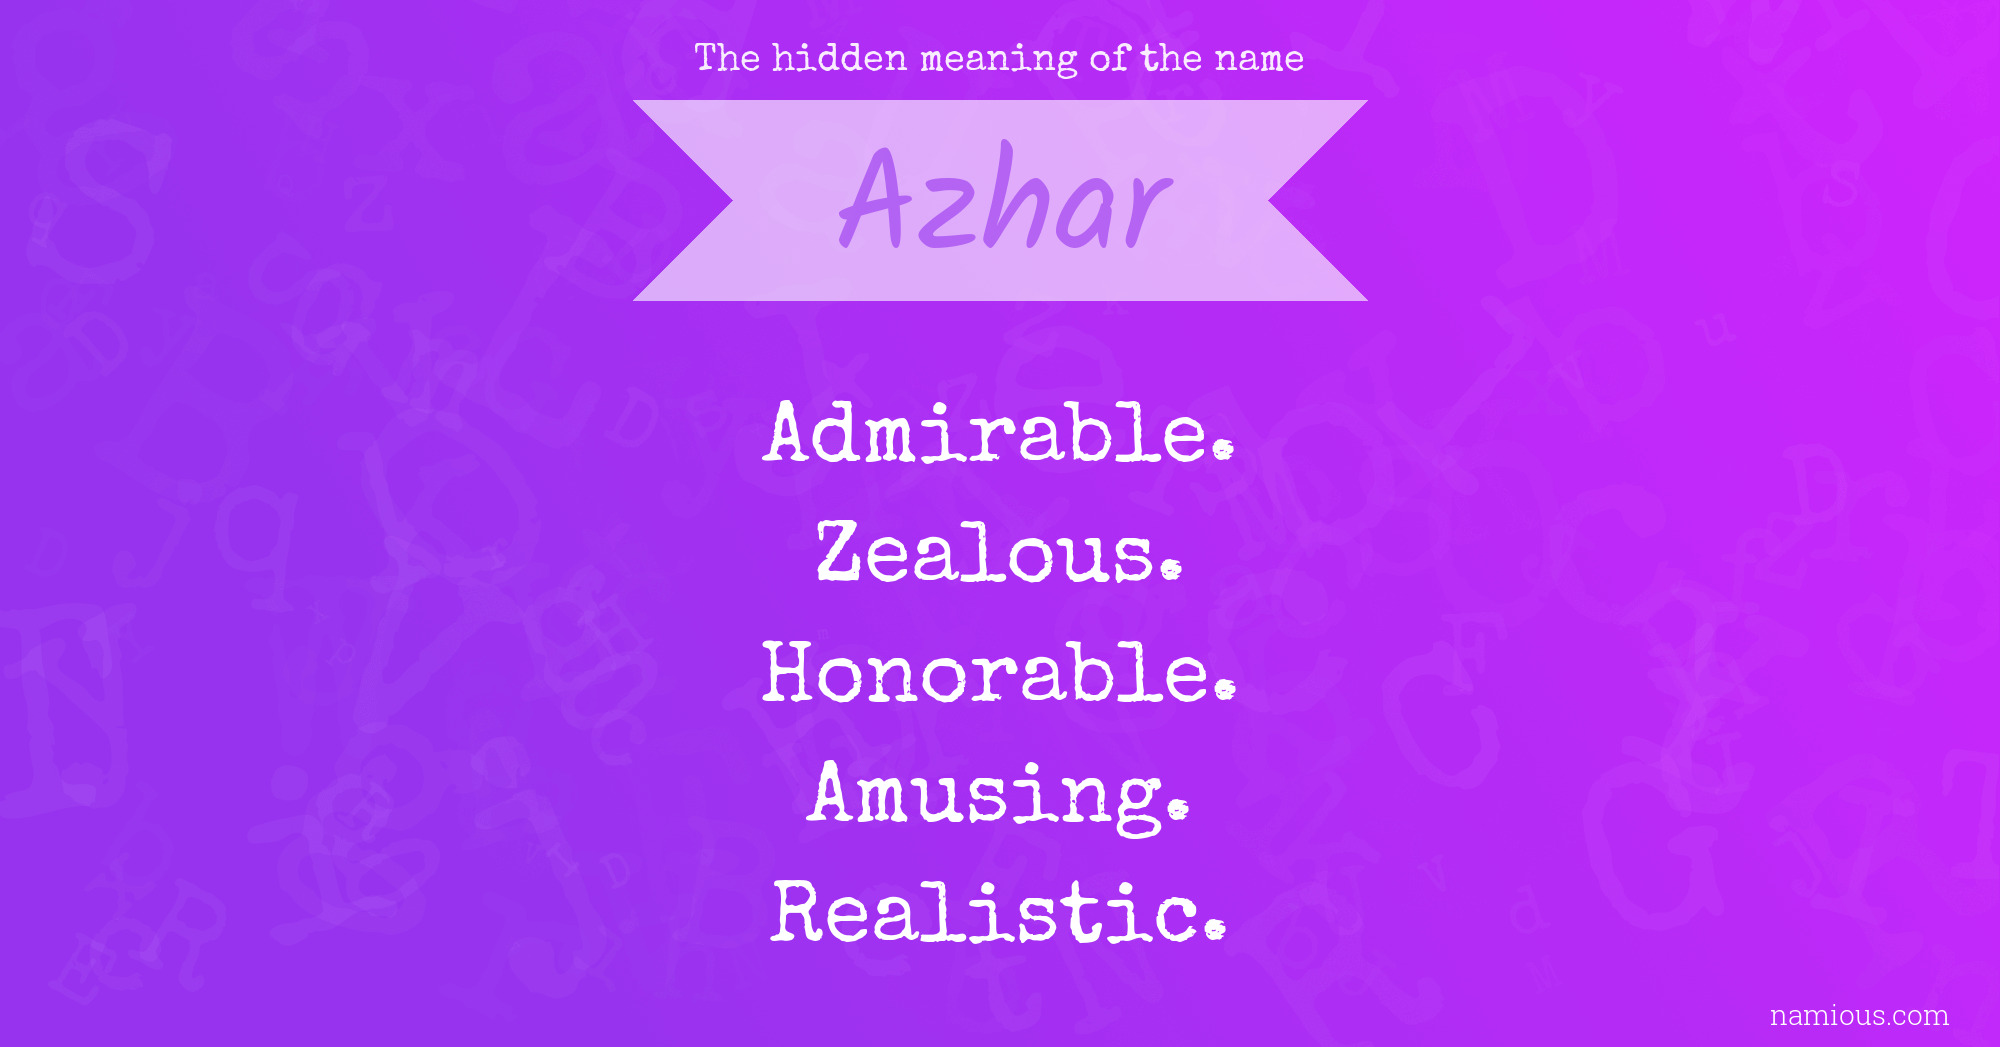 The hidden meaning of the name Azhar